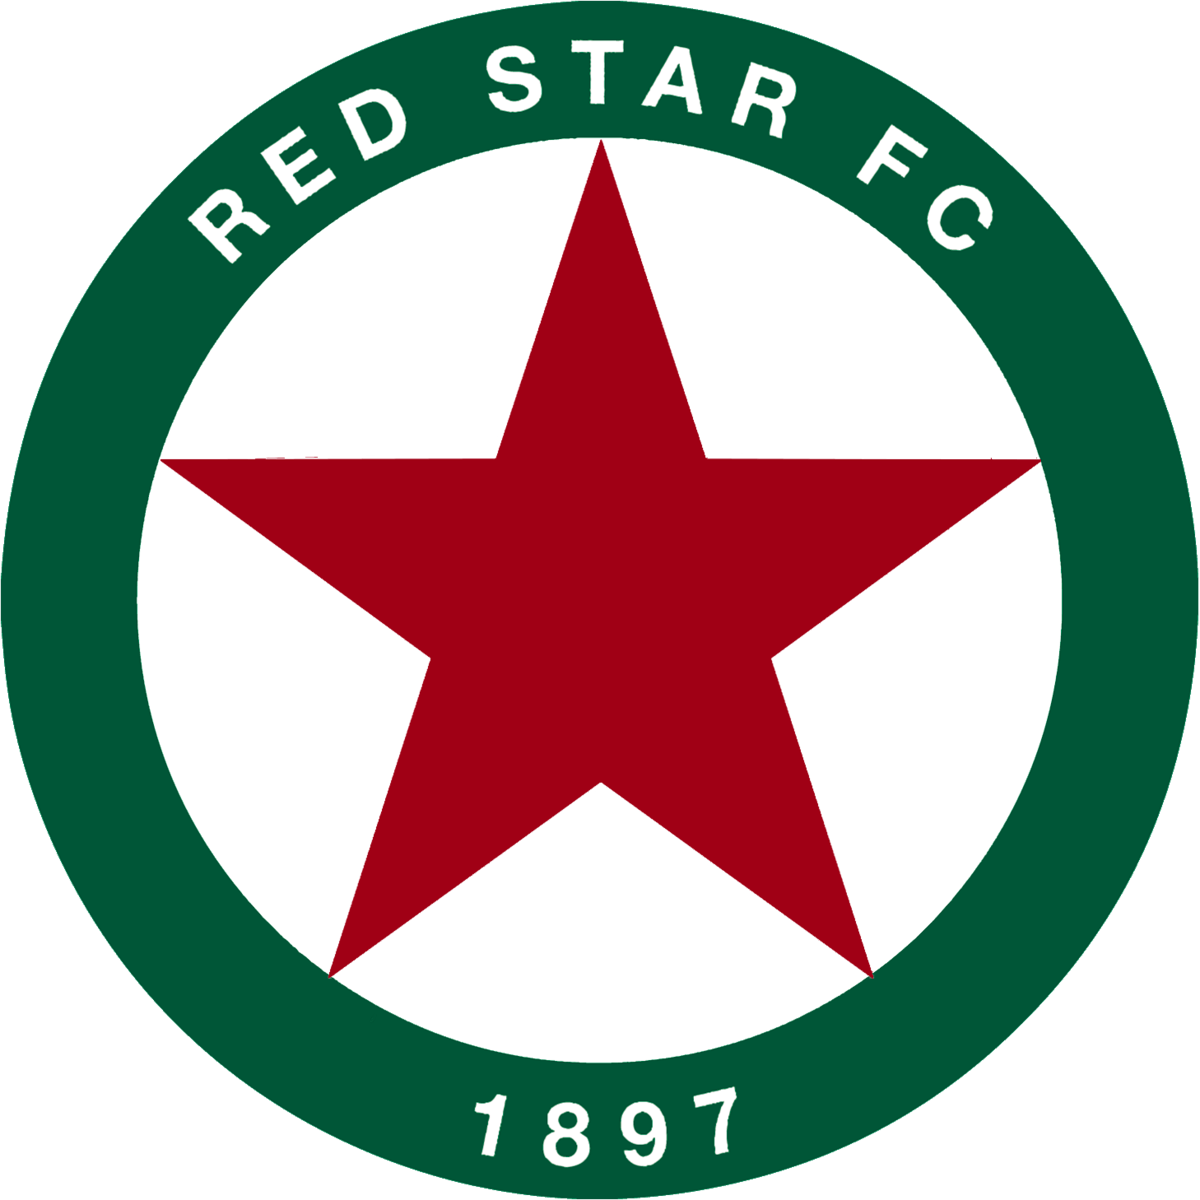 What Company Has a Star in Circle Logo - Red Star F.C.